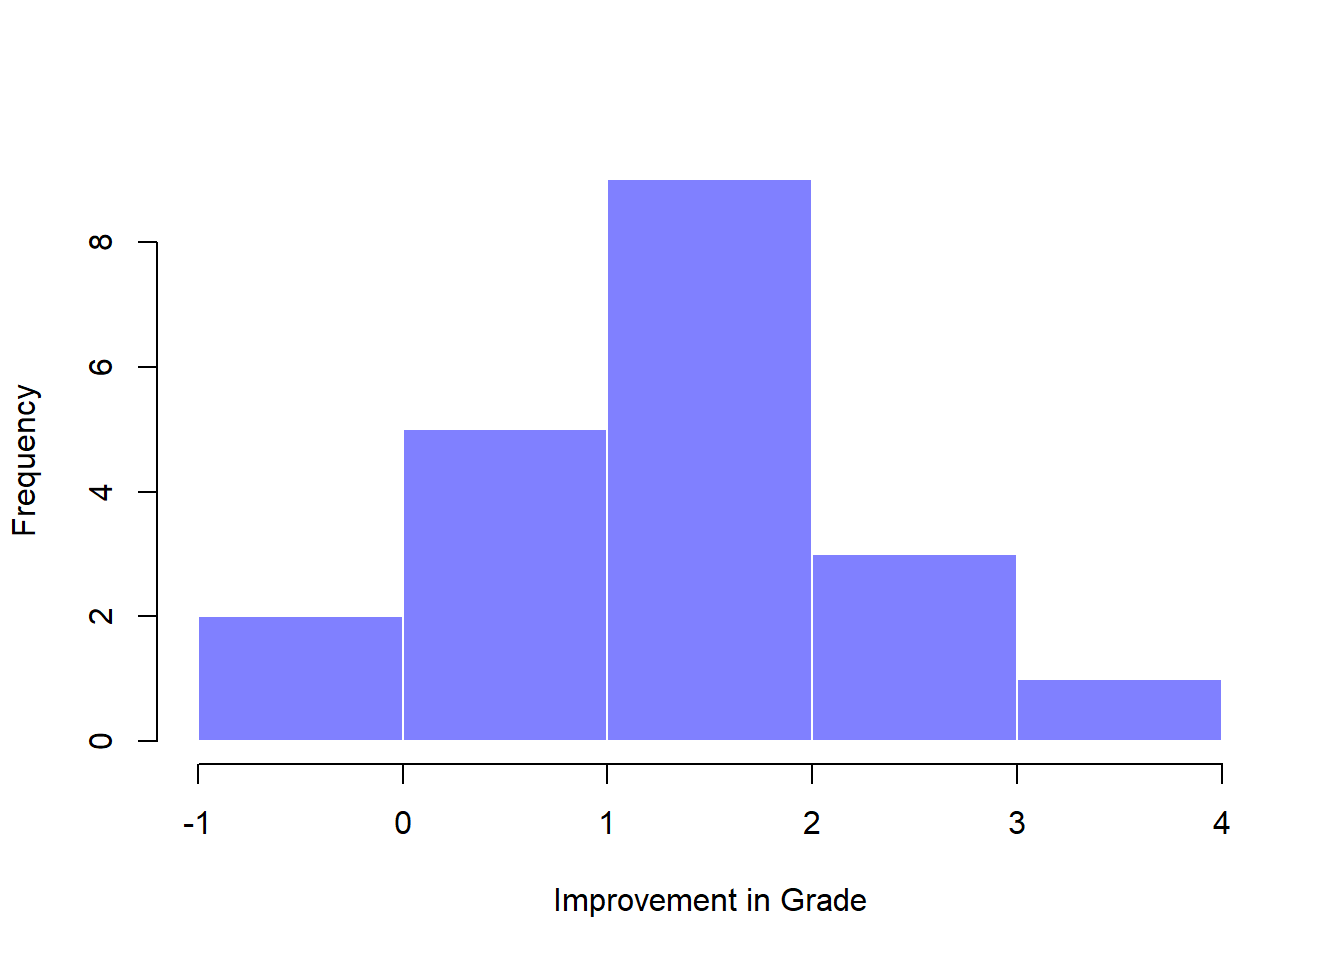 Histogram showing the improvement made by each student in Dr Chico's class. Notice that almost the entire distribution is above zero: the vast majority of students did improve their performance from the first test to the second one